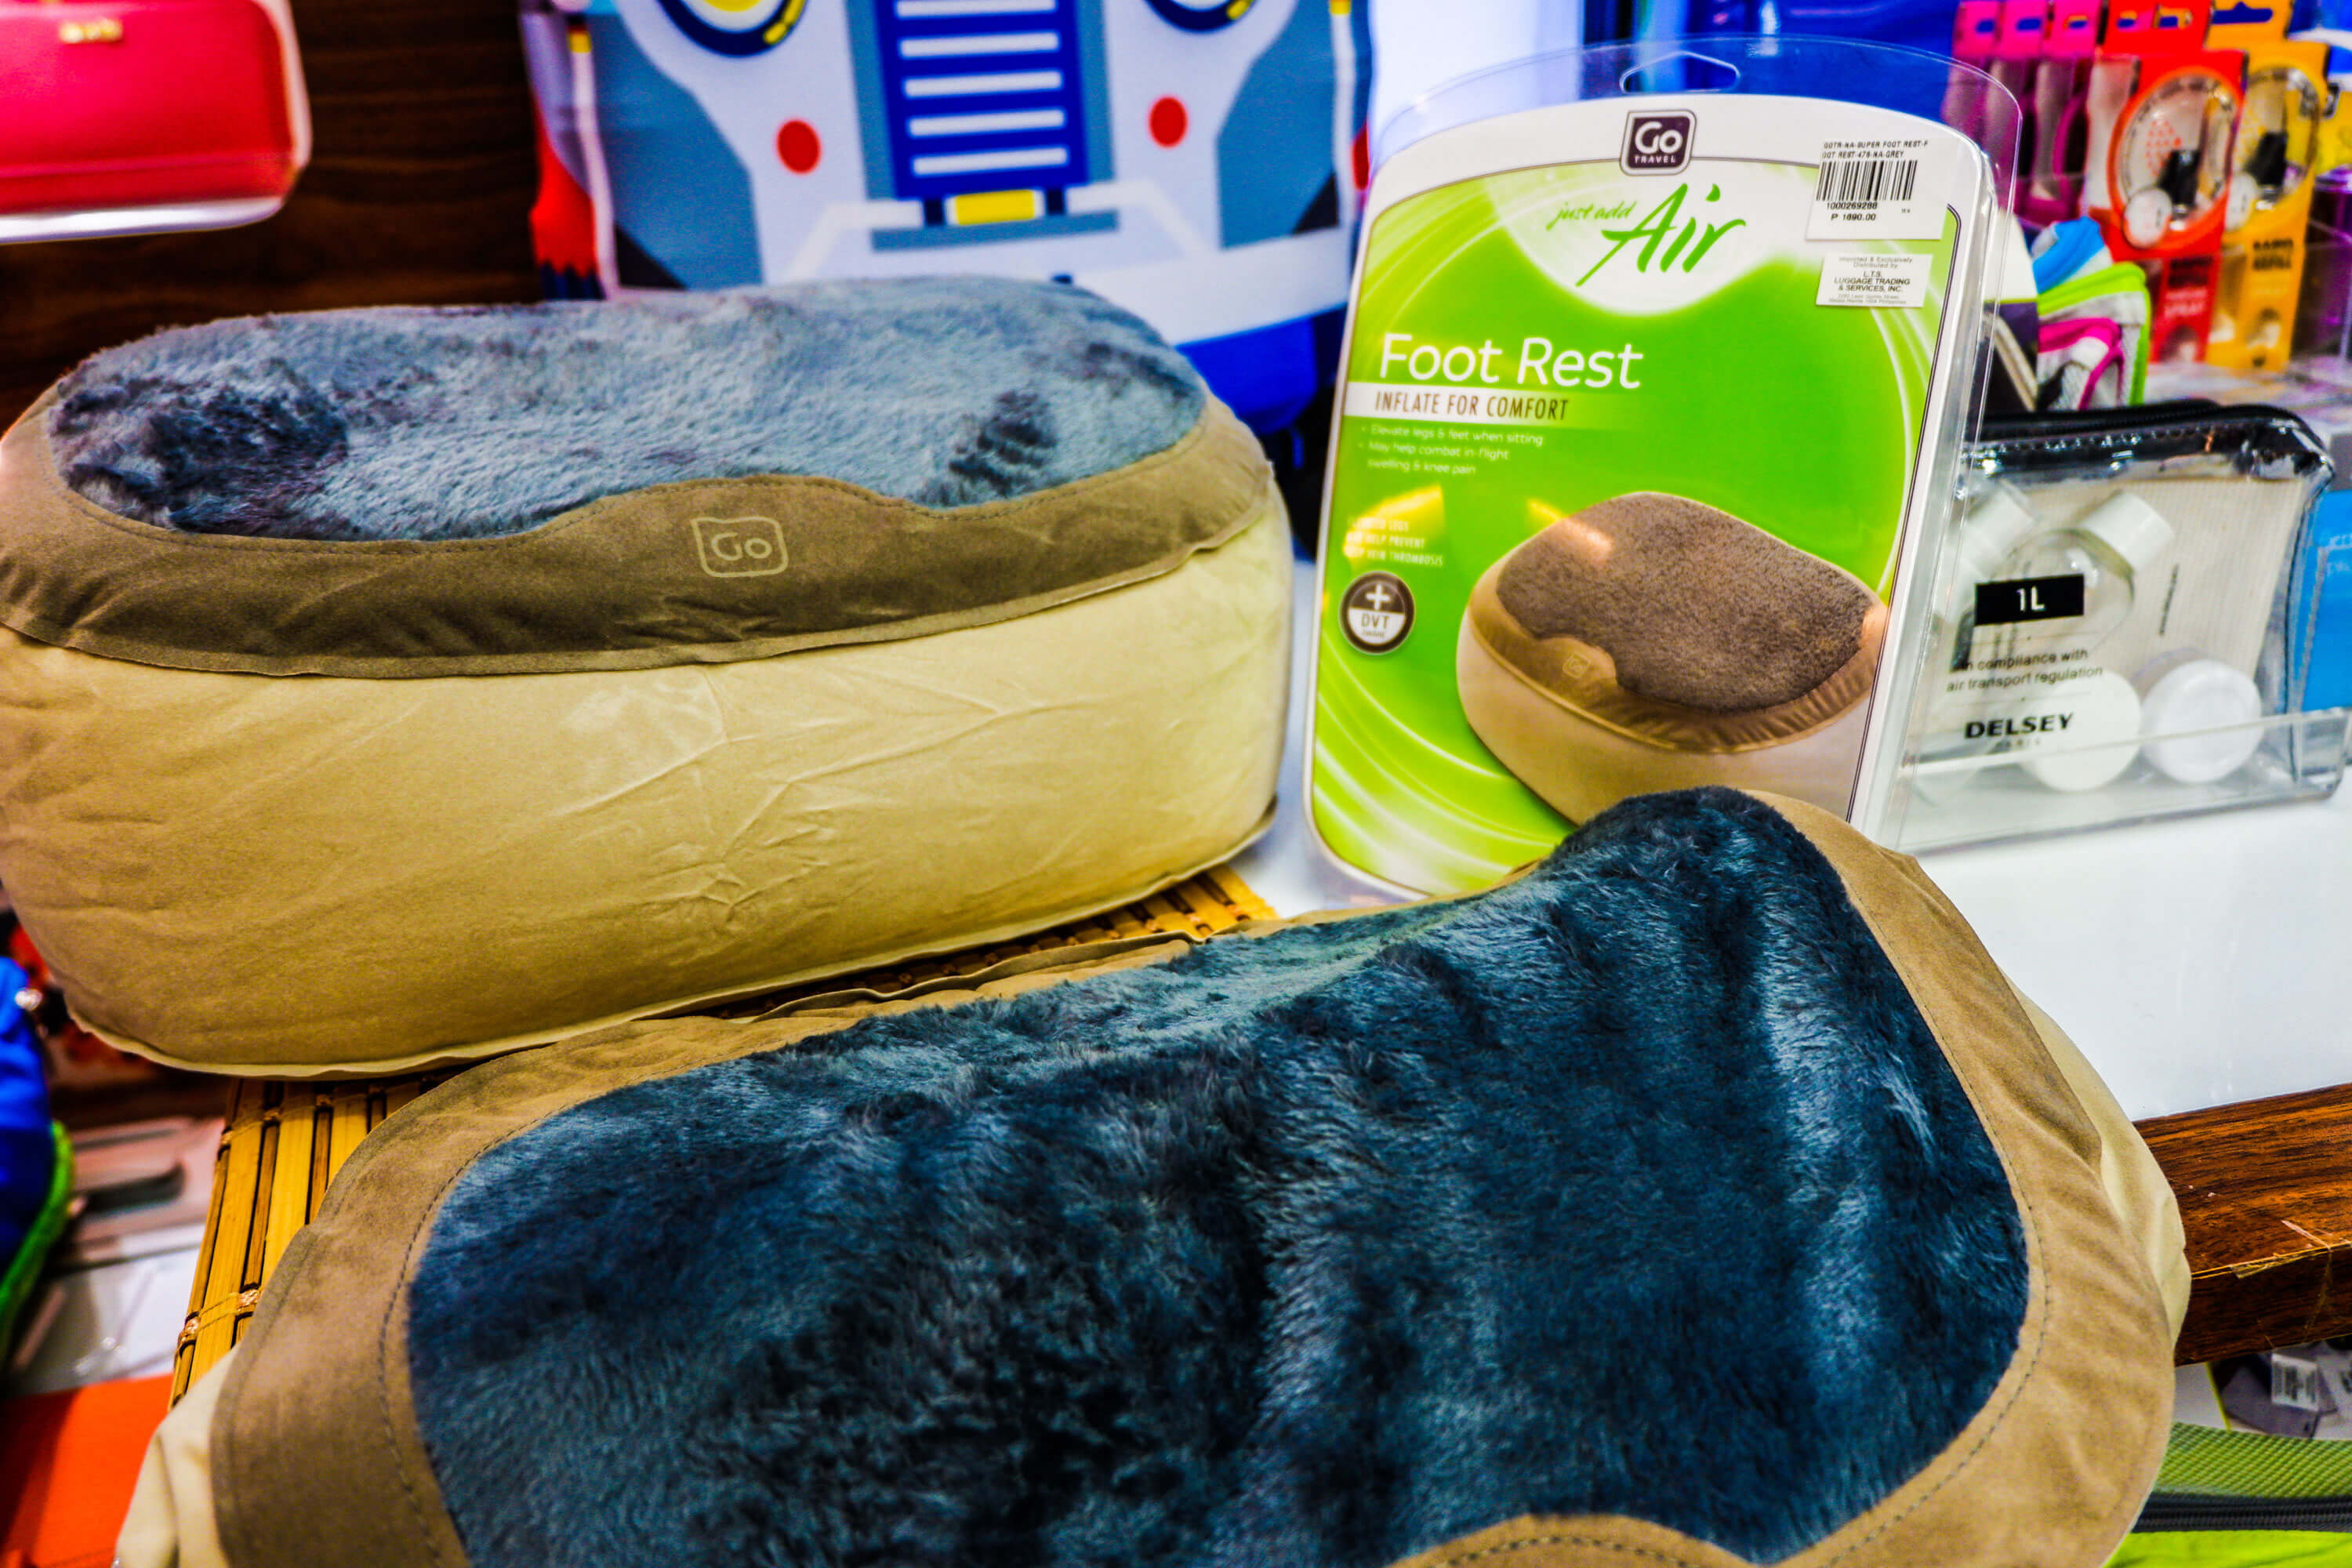 Make the trip even more comfortable with this inflatable foot rest.